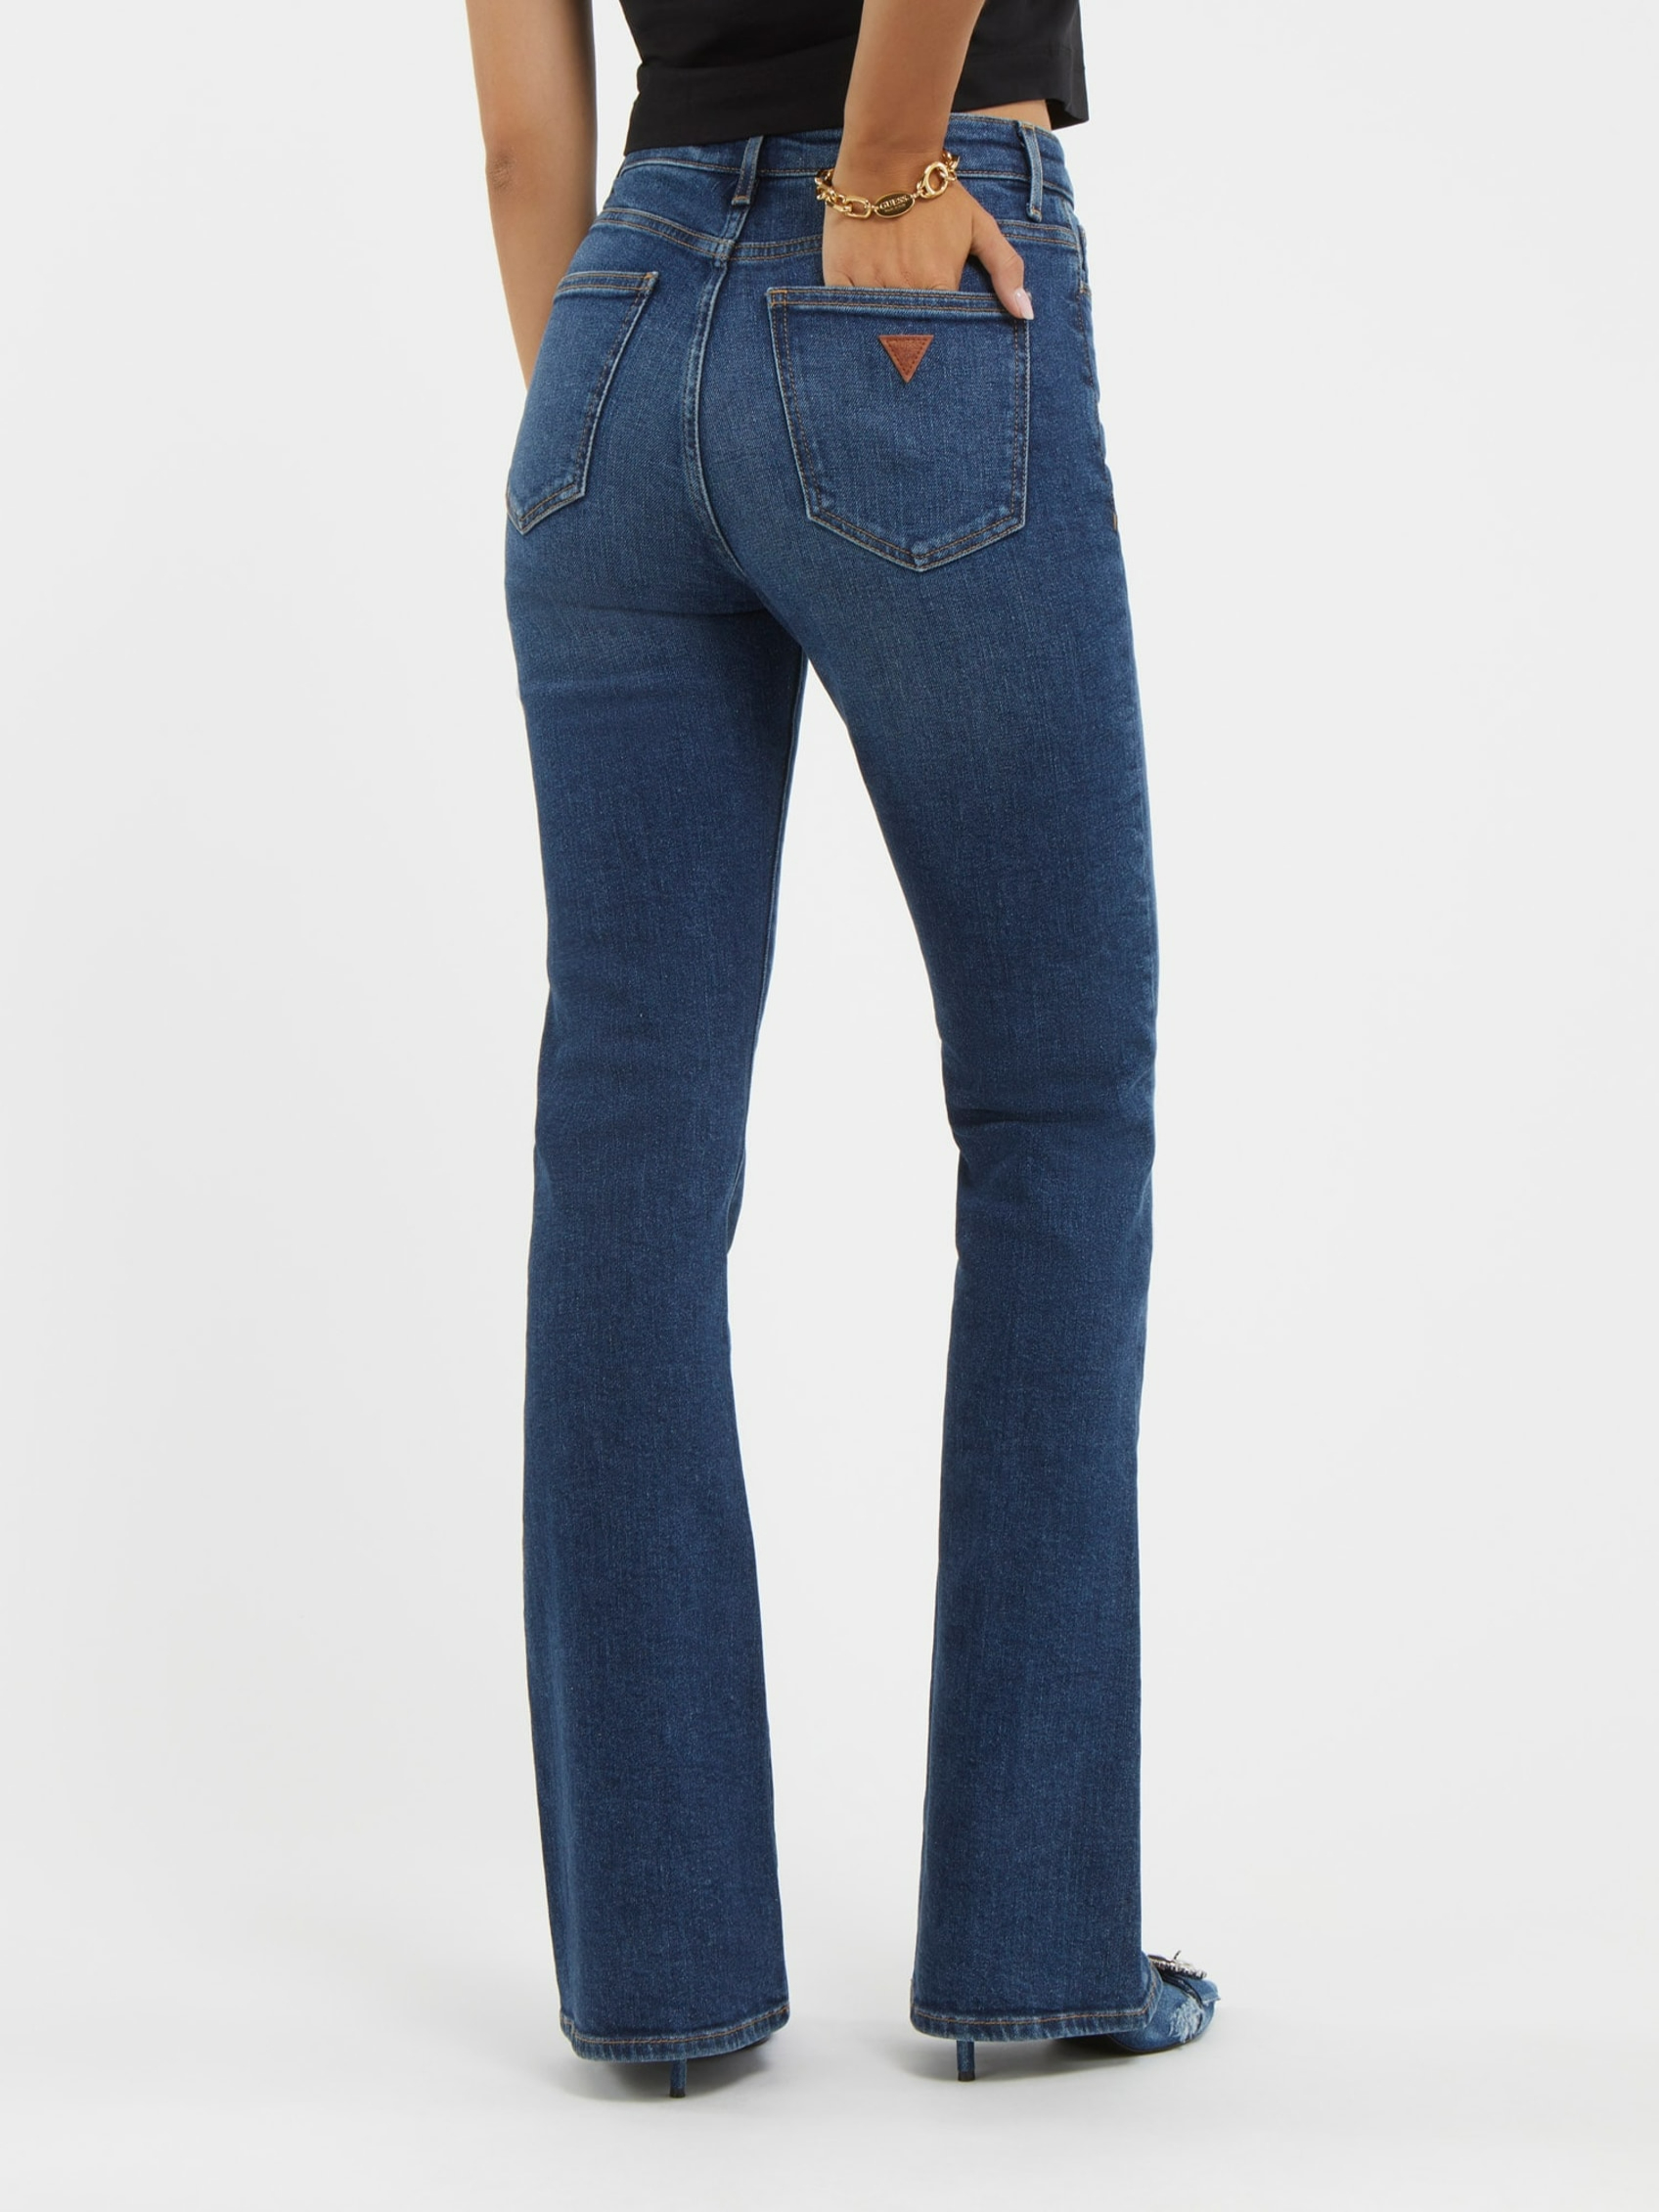 ECO SEXY FLARE DENIM PANTS | Guess Philippines